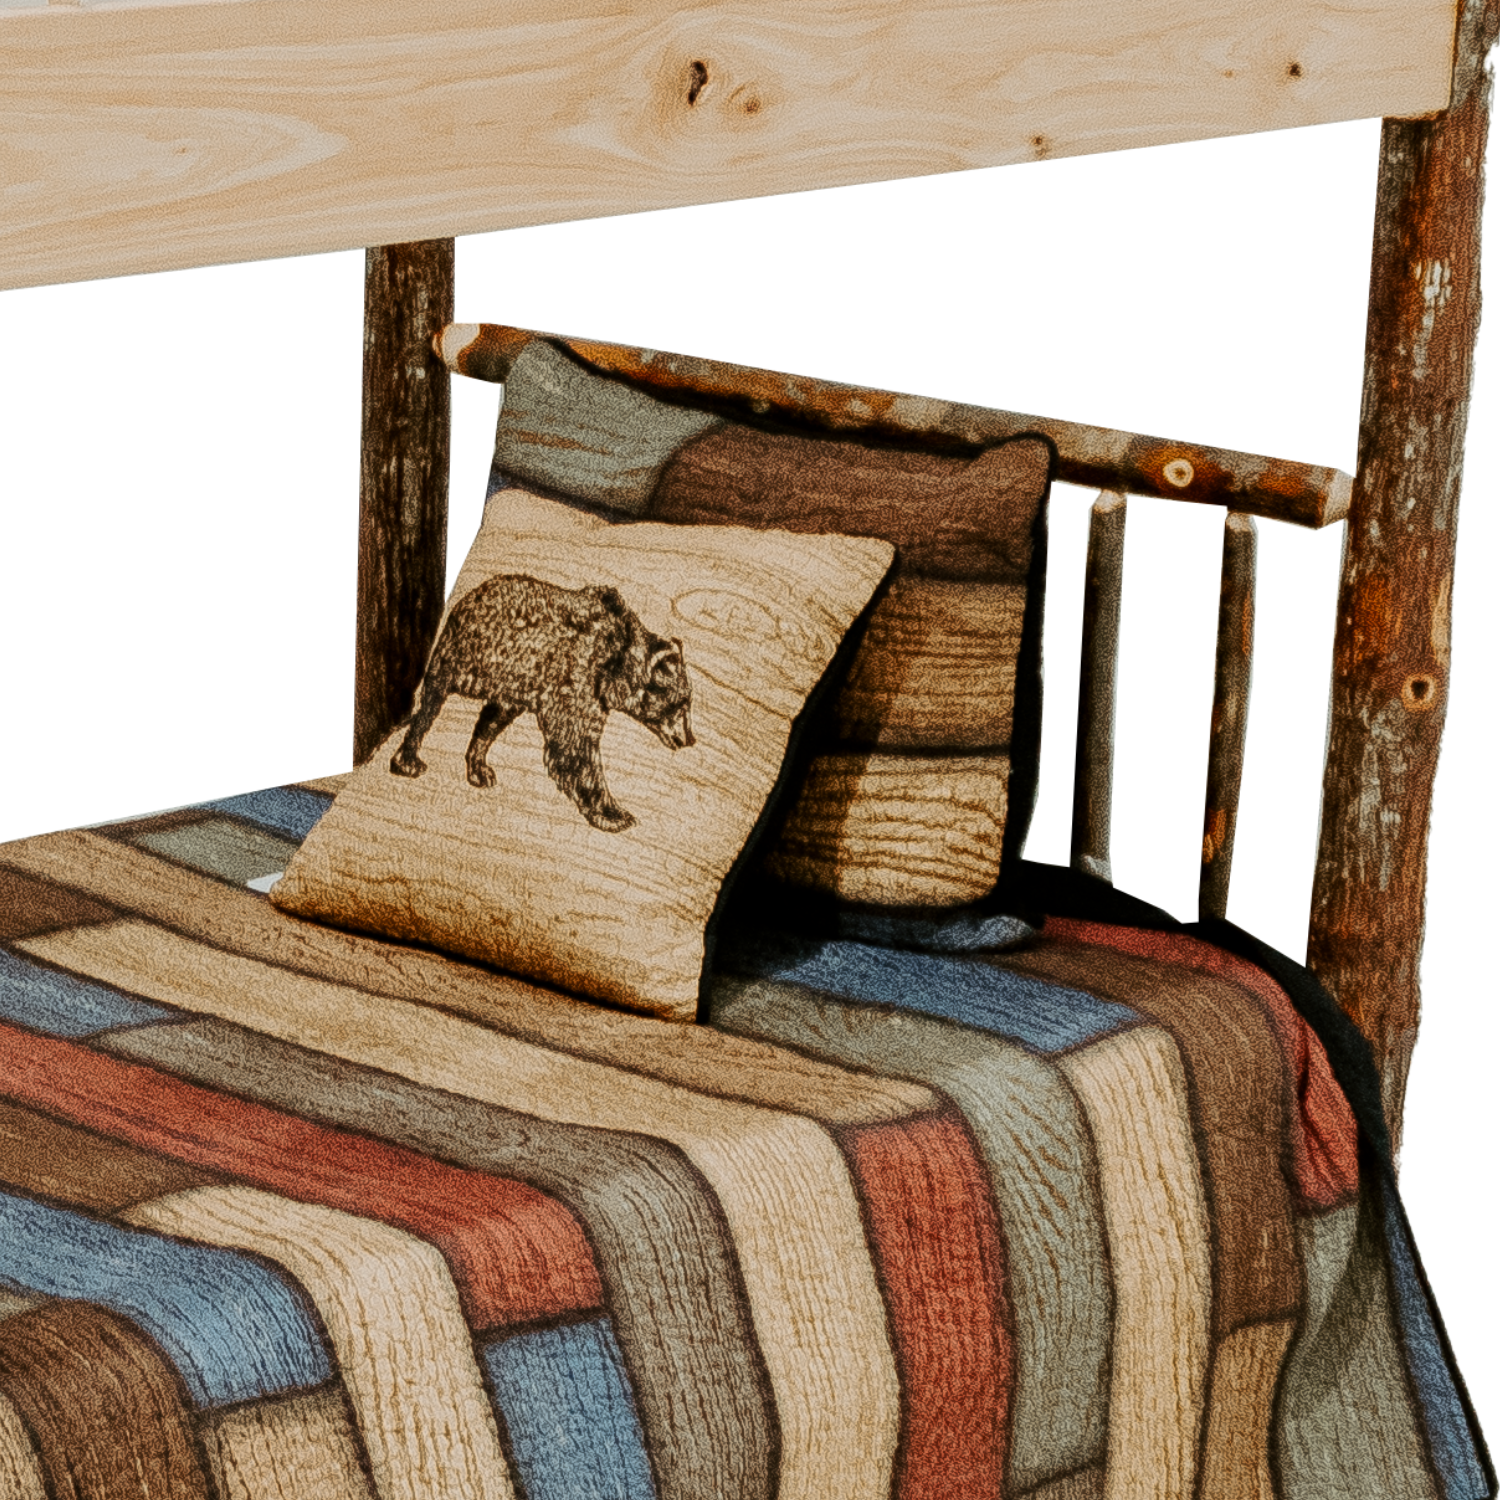 Hickory Bunk Bed